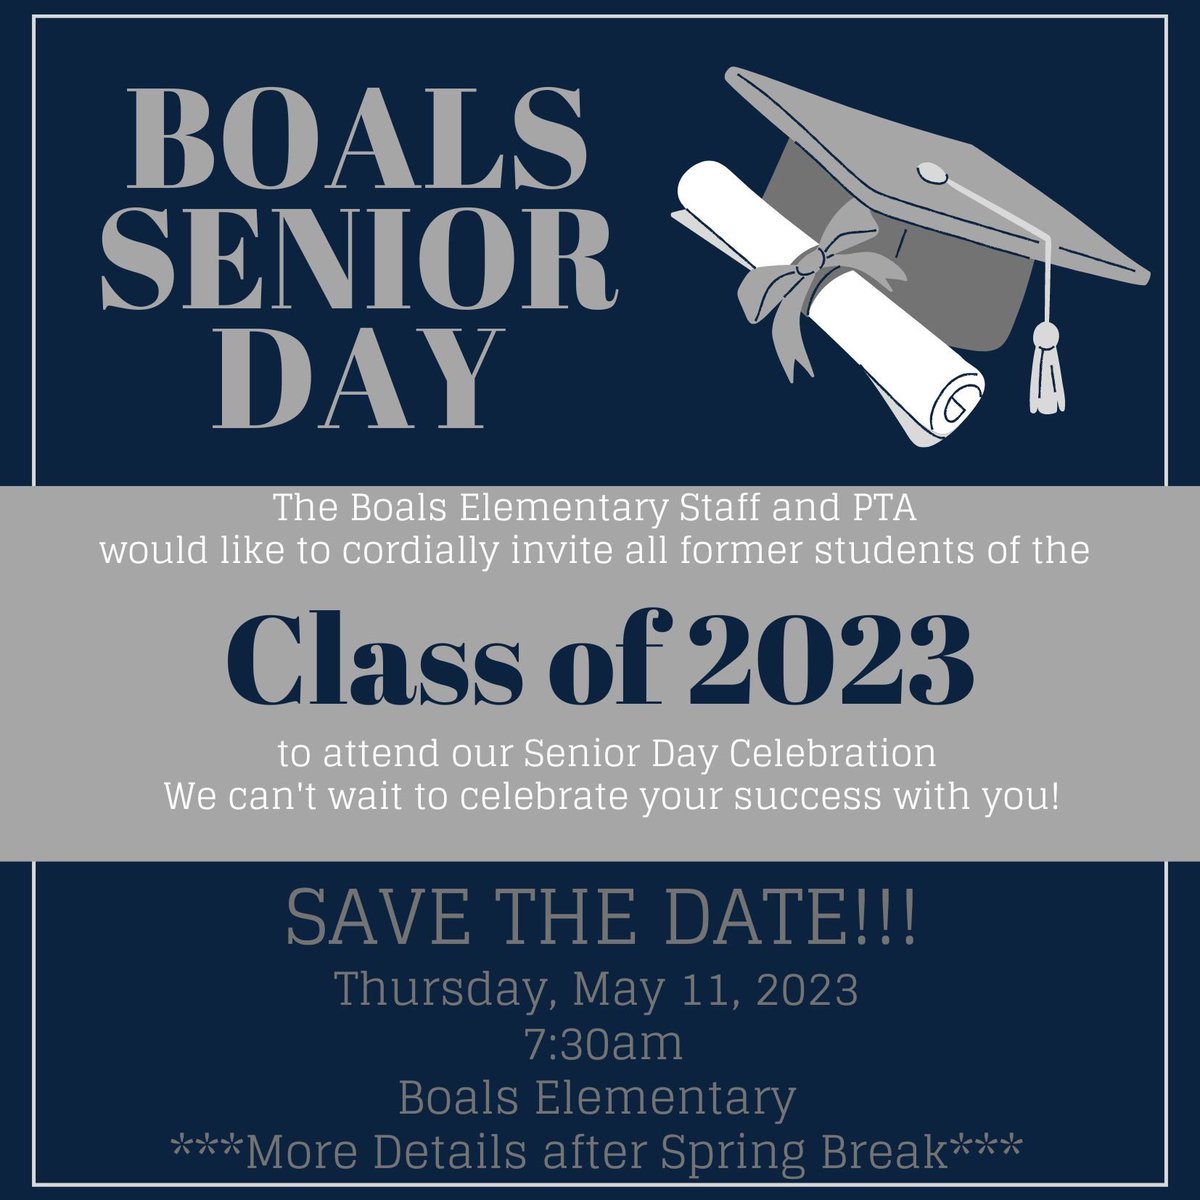 Class of 2023- It’s time to Save the Date for Boals Senior Day! More details about sign up after Spring Break.